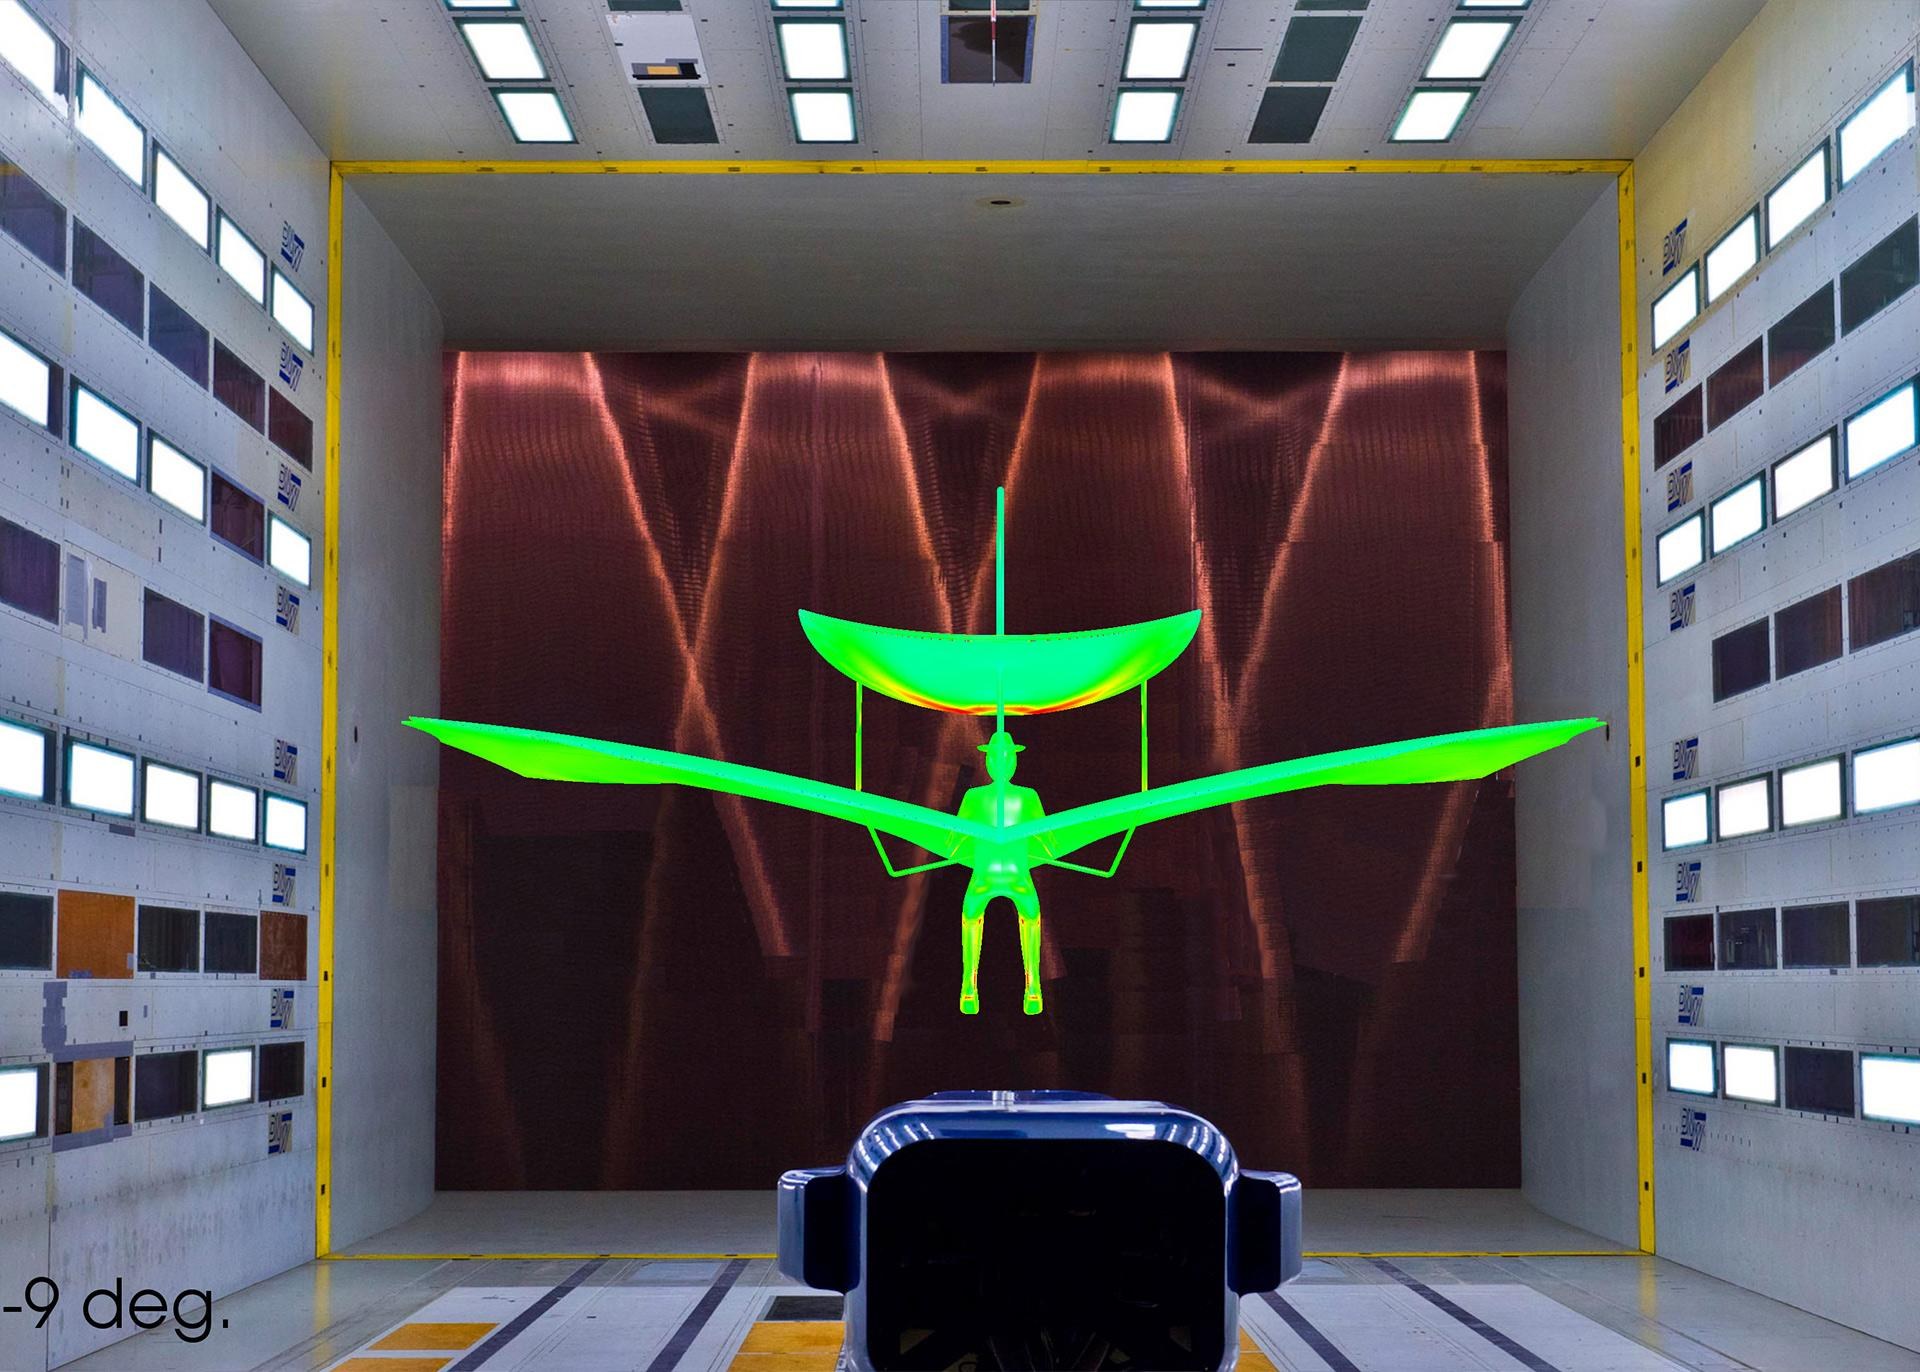 Simulation of Lilienthal's flight in the wind tunnel